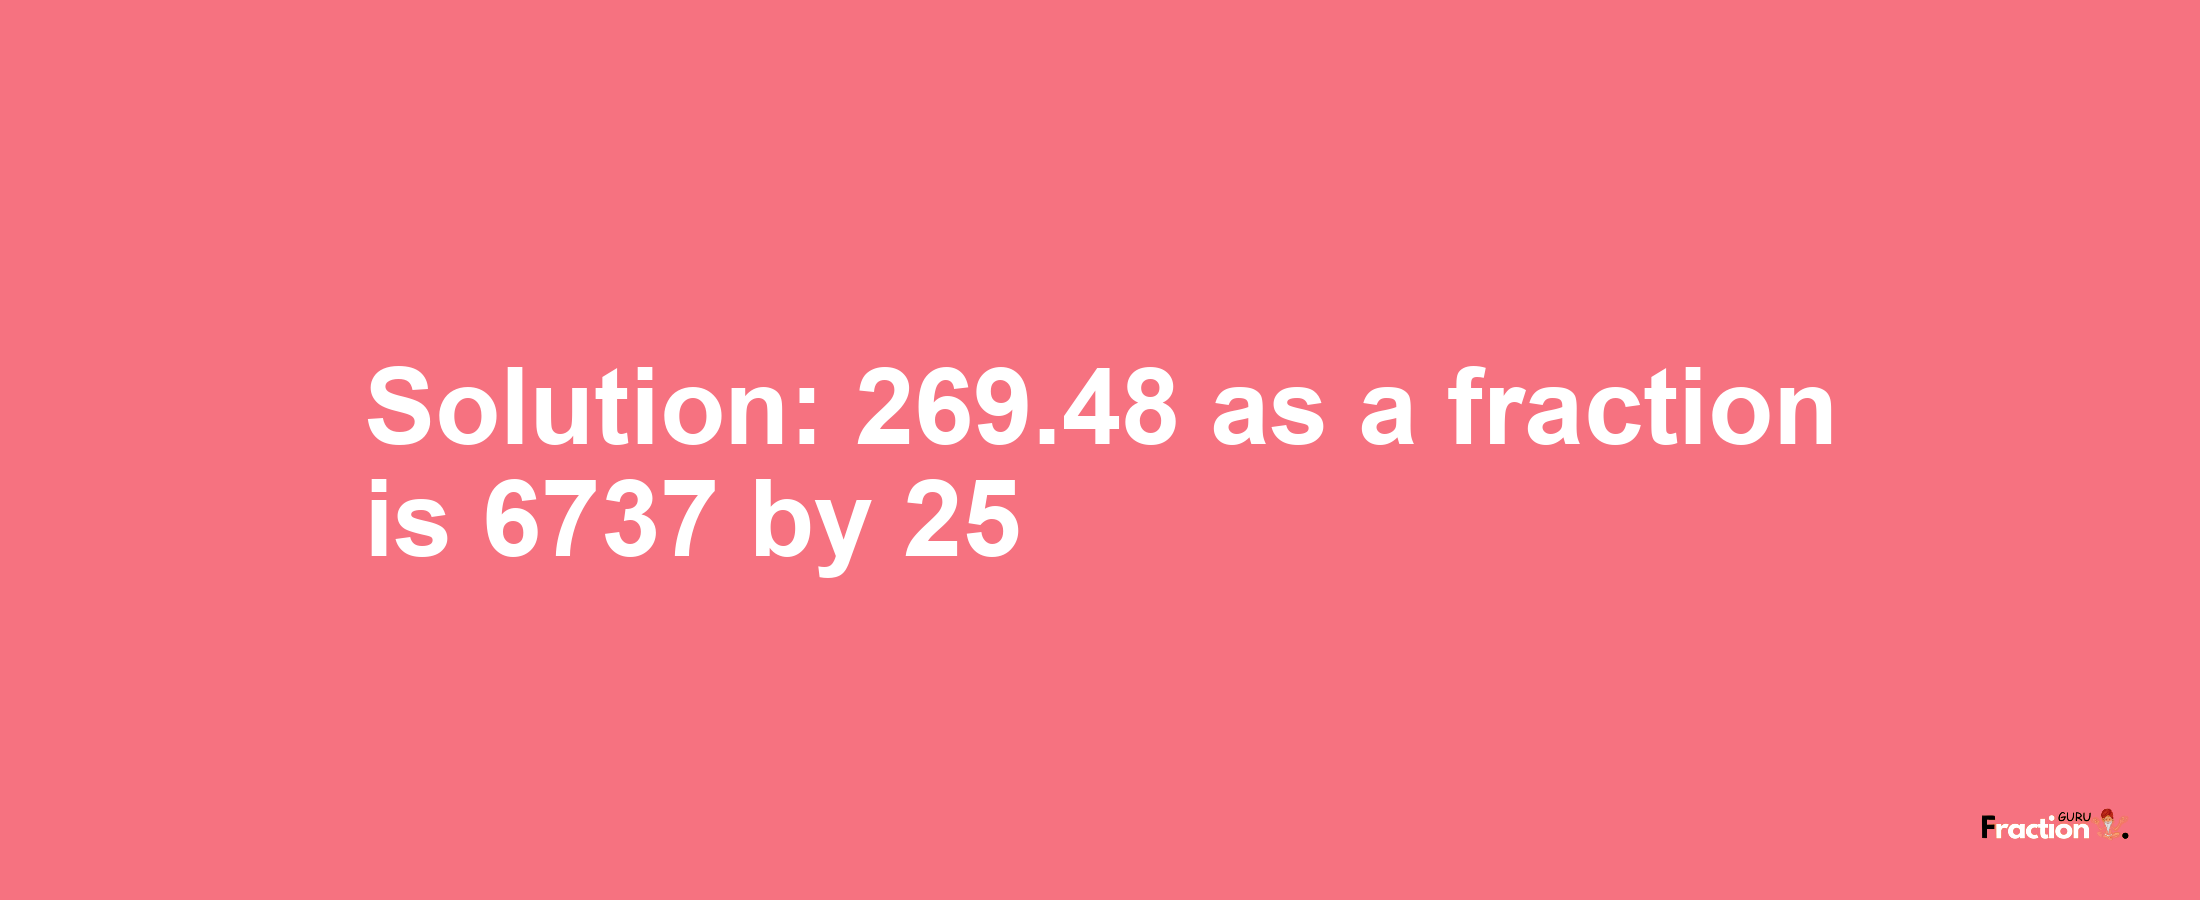 Solution:269.48 as a fraction is 6737/25